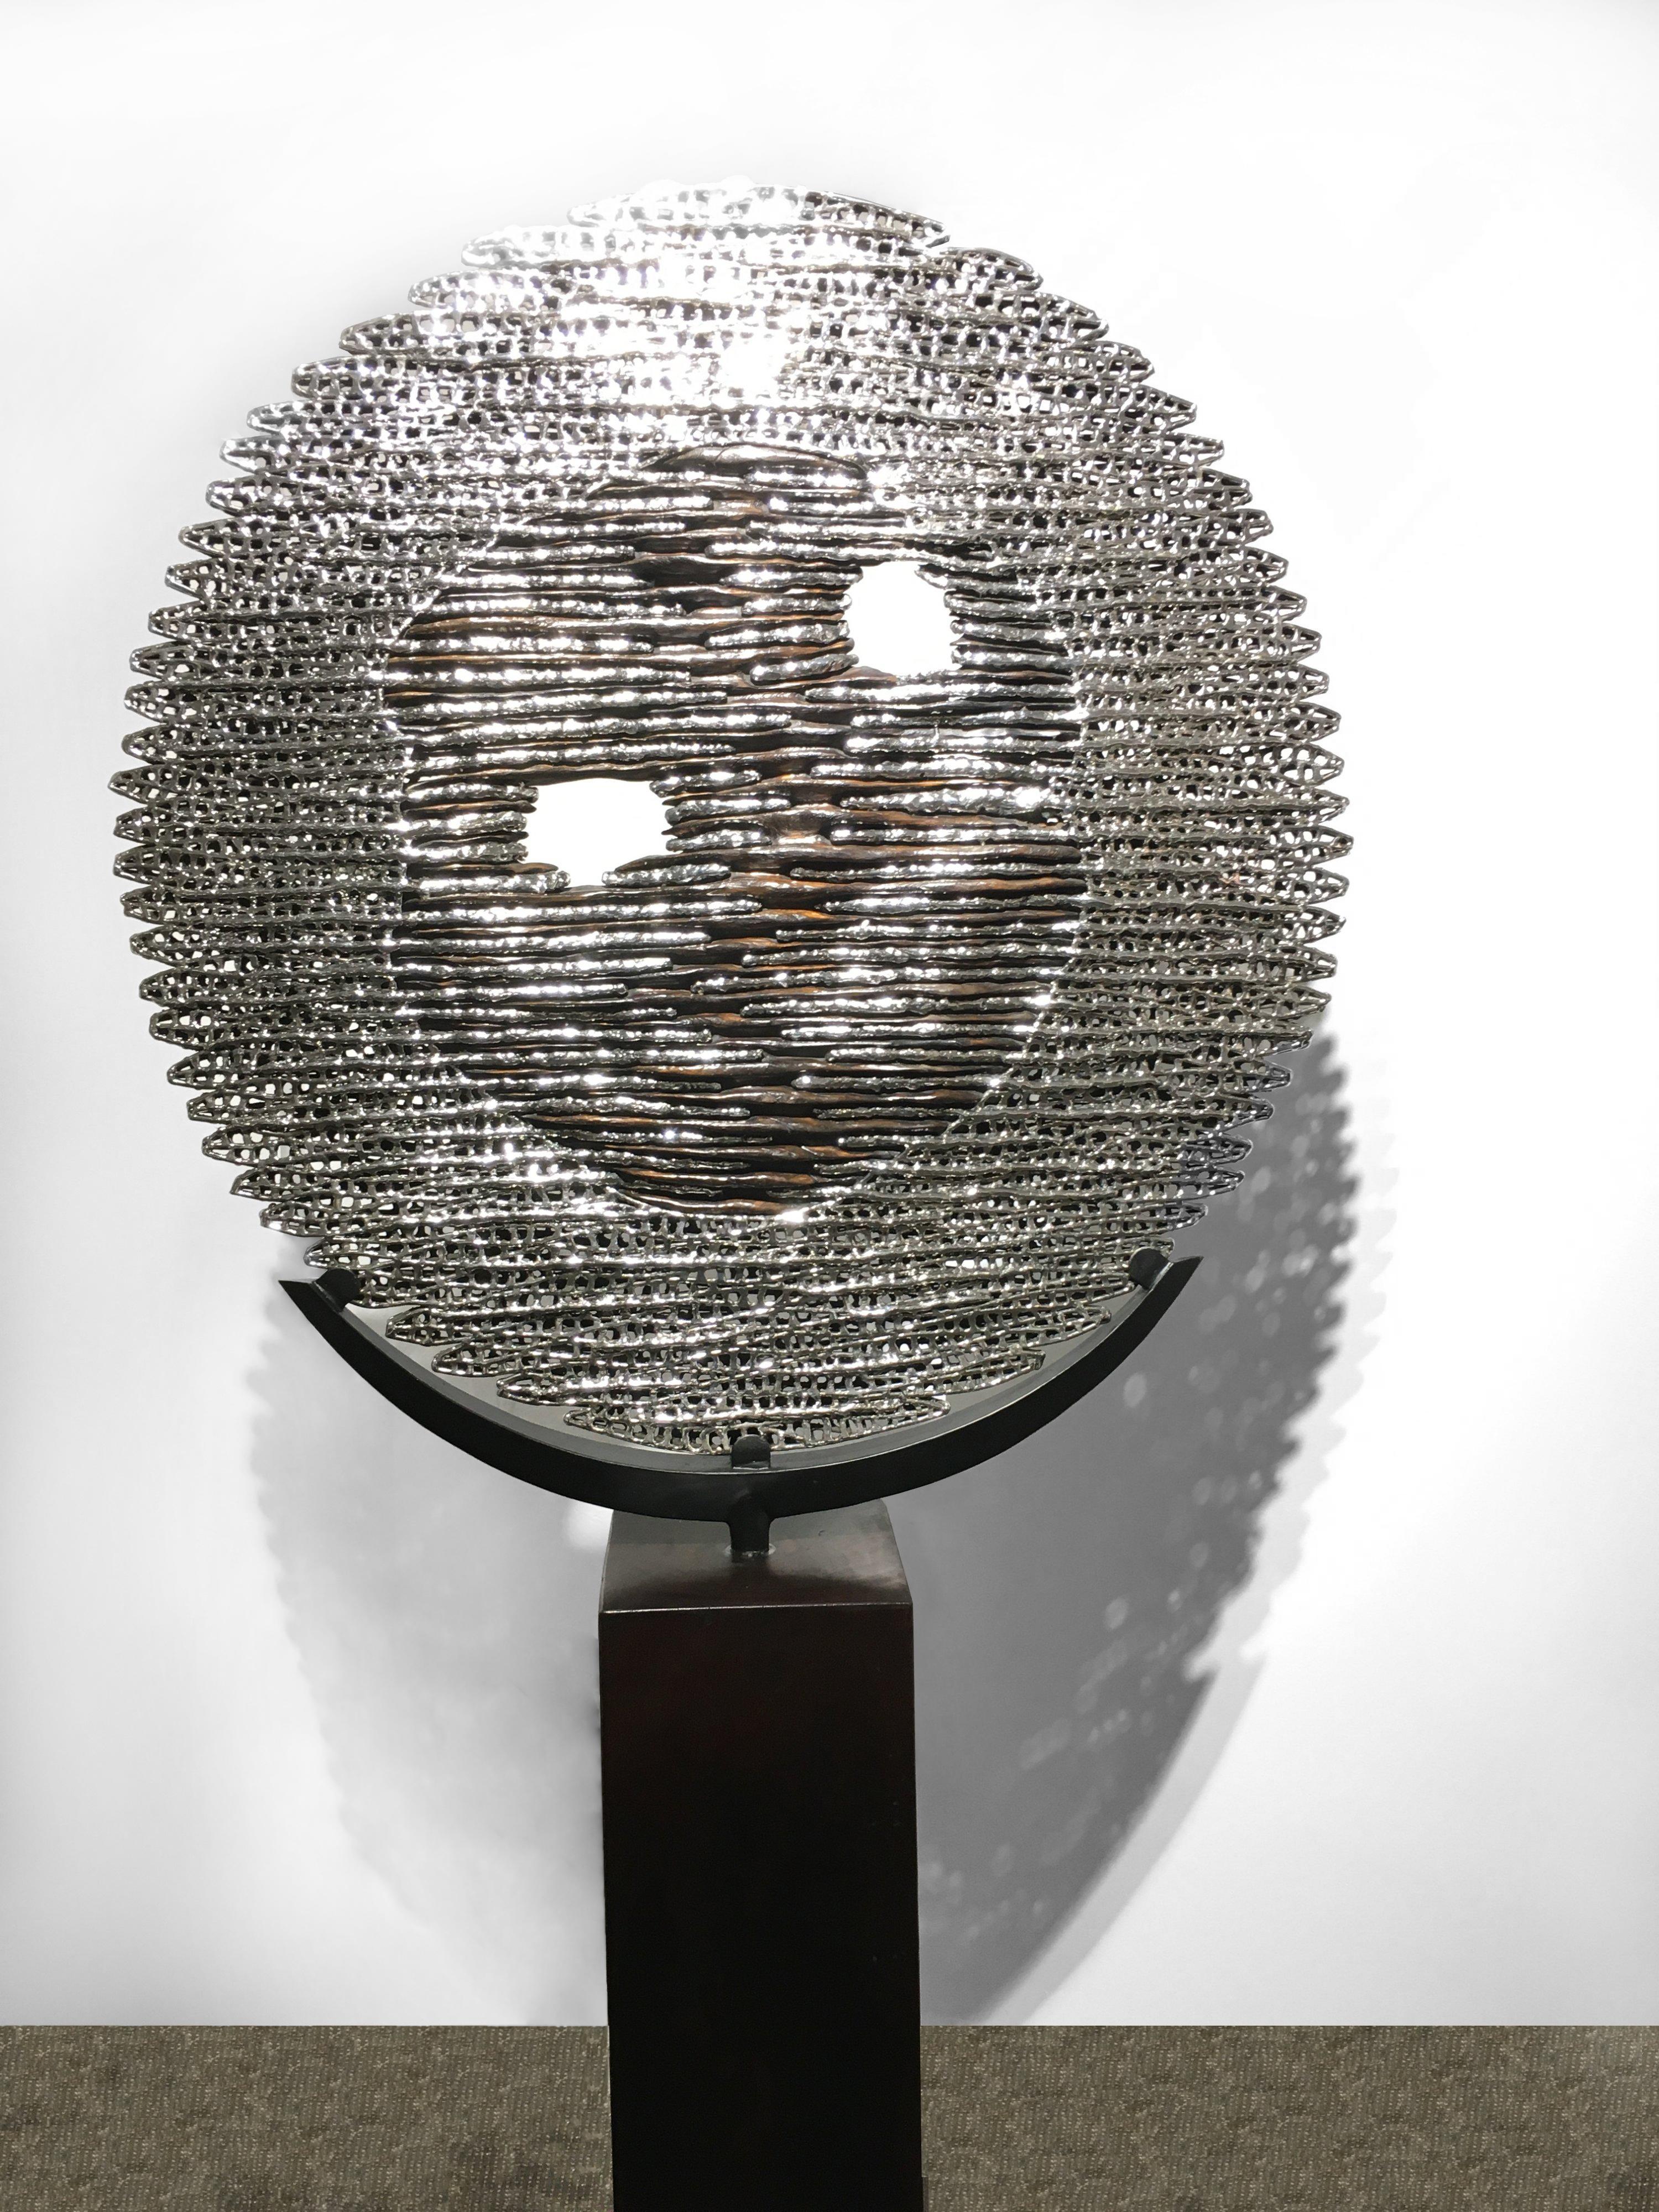 Solar Eclipse - 21st Century, Contemporary, Abstract Sculpture, Stainless Steel